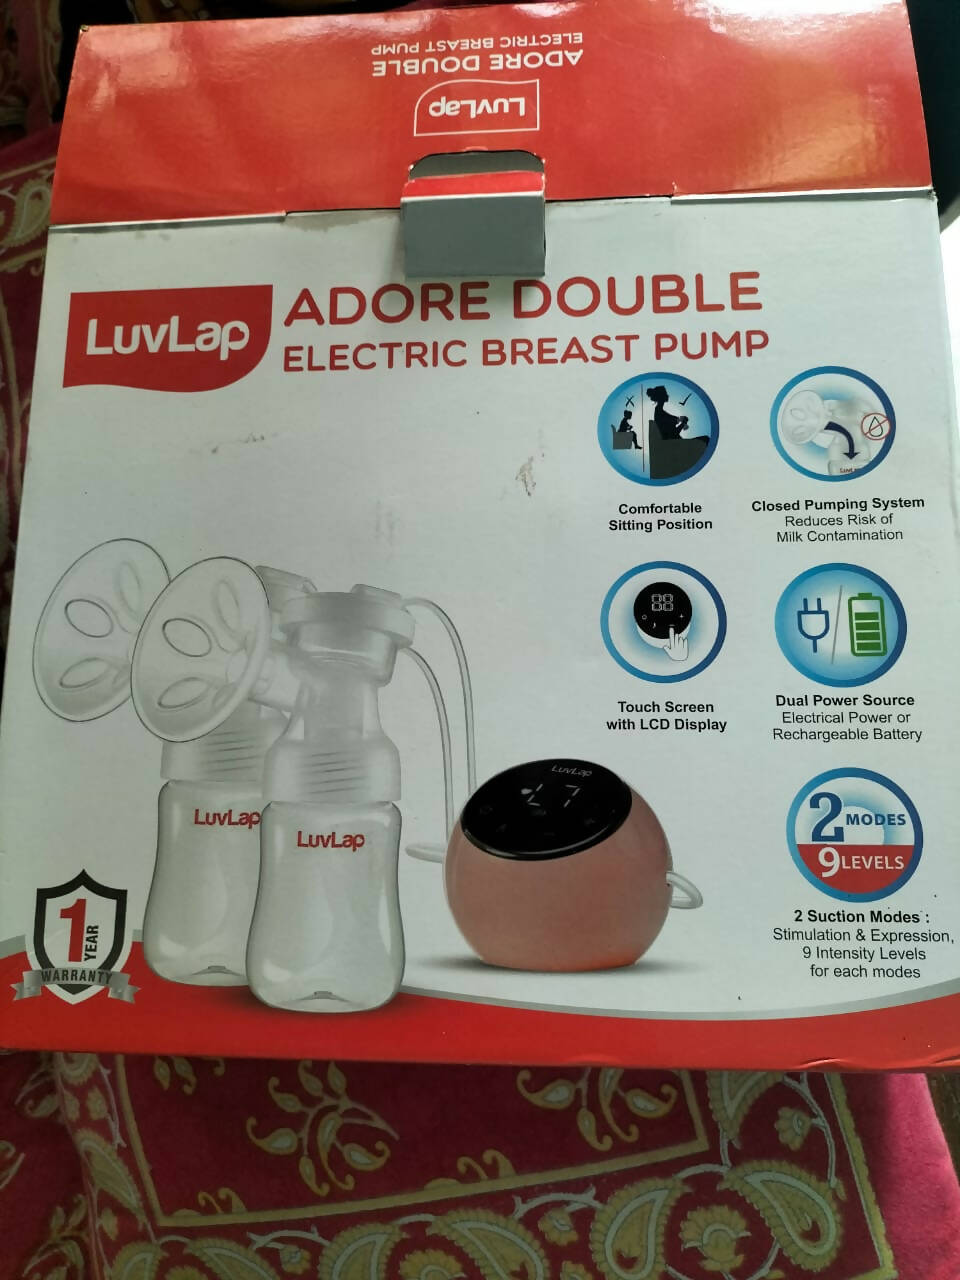 LUVLAP adore double electric breastpump